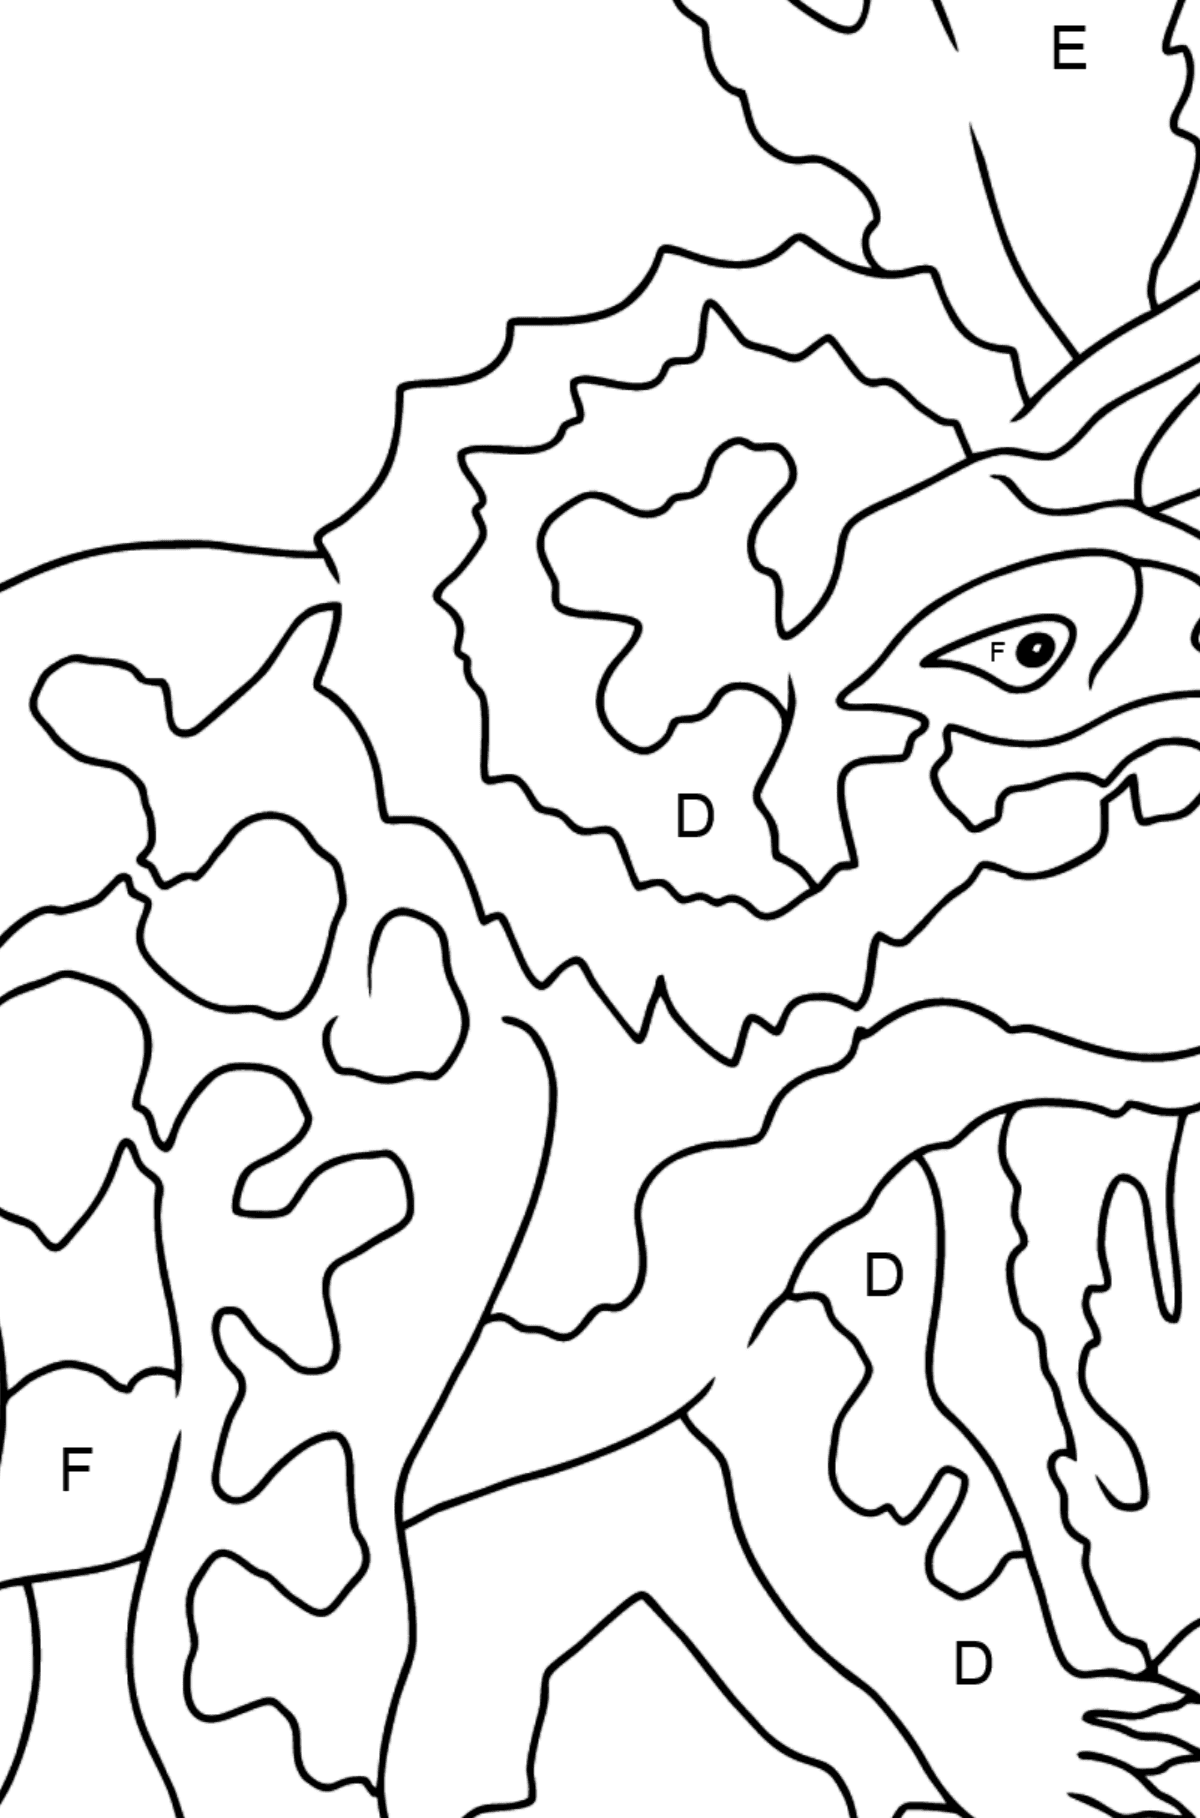 Triceratops Coloring Page - Coloring by Letters for Kids